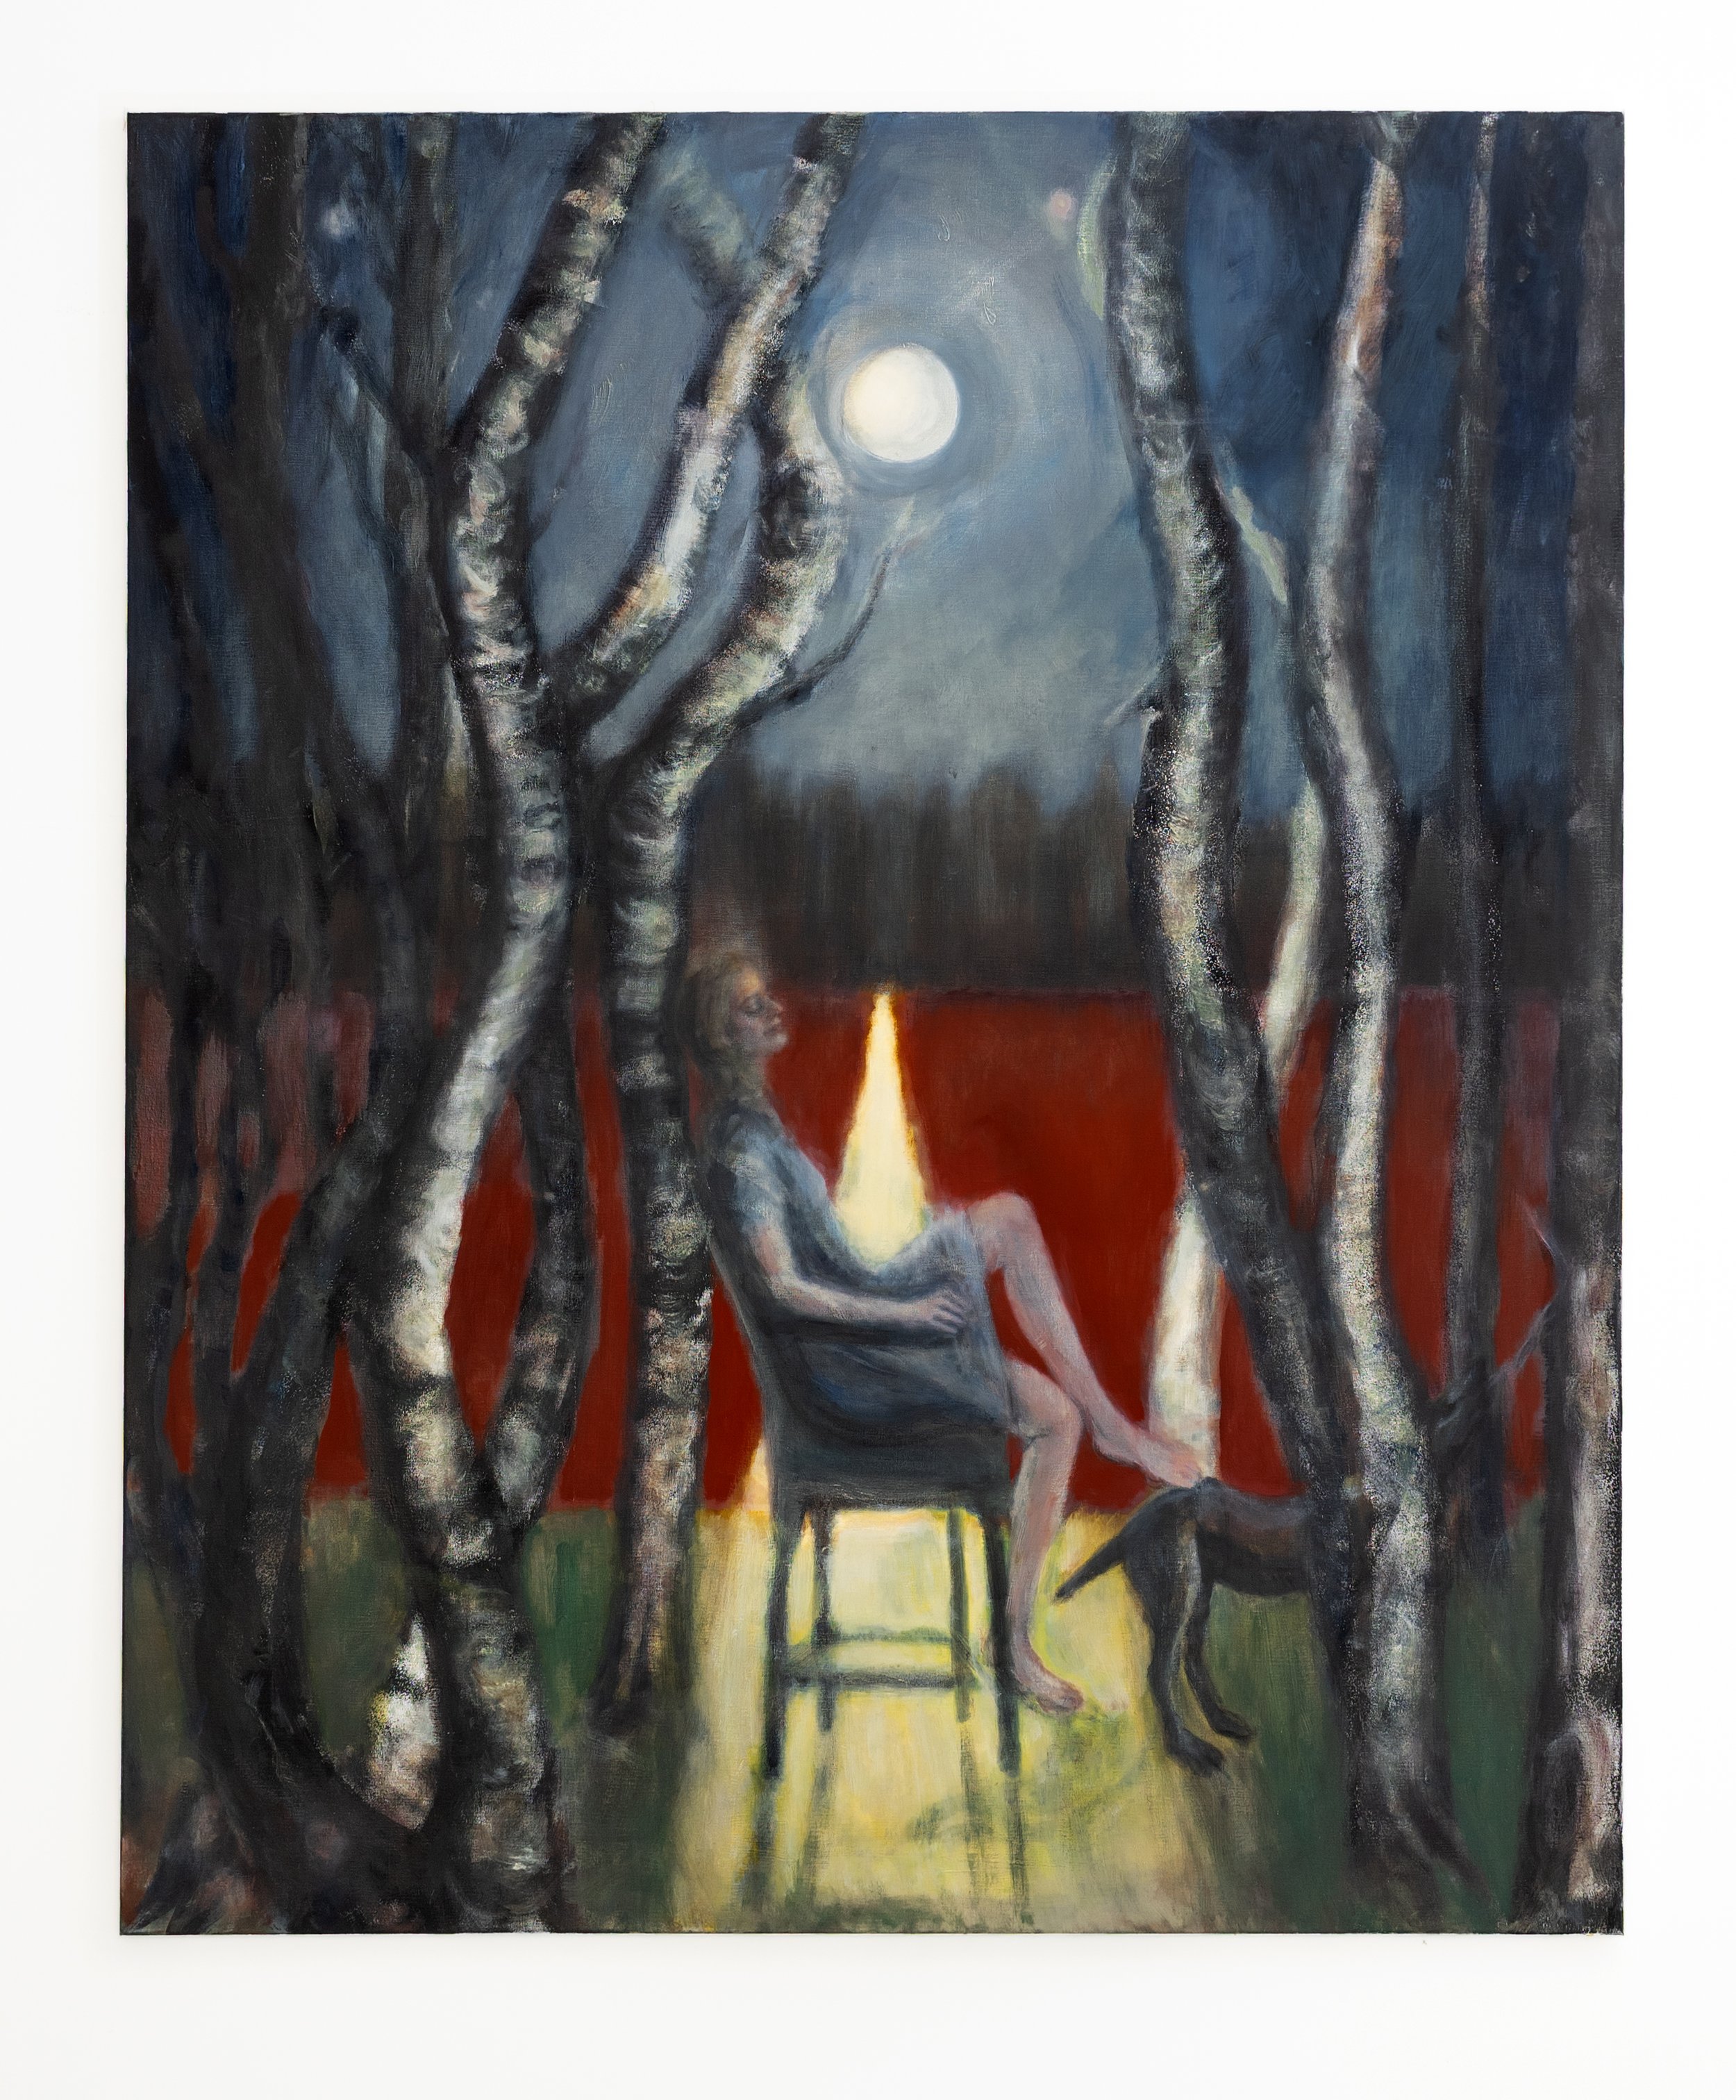   Darklights and Promises (Woman in Forest with Moon),  2020, oil, resin and beeswax on canvas, 170 x 140 cm  